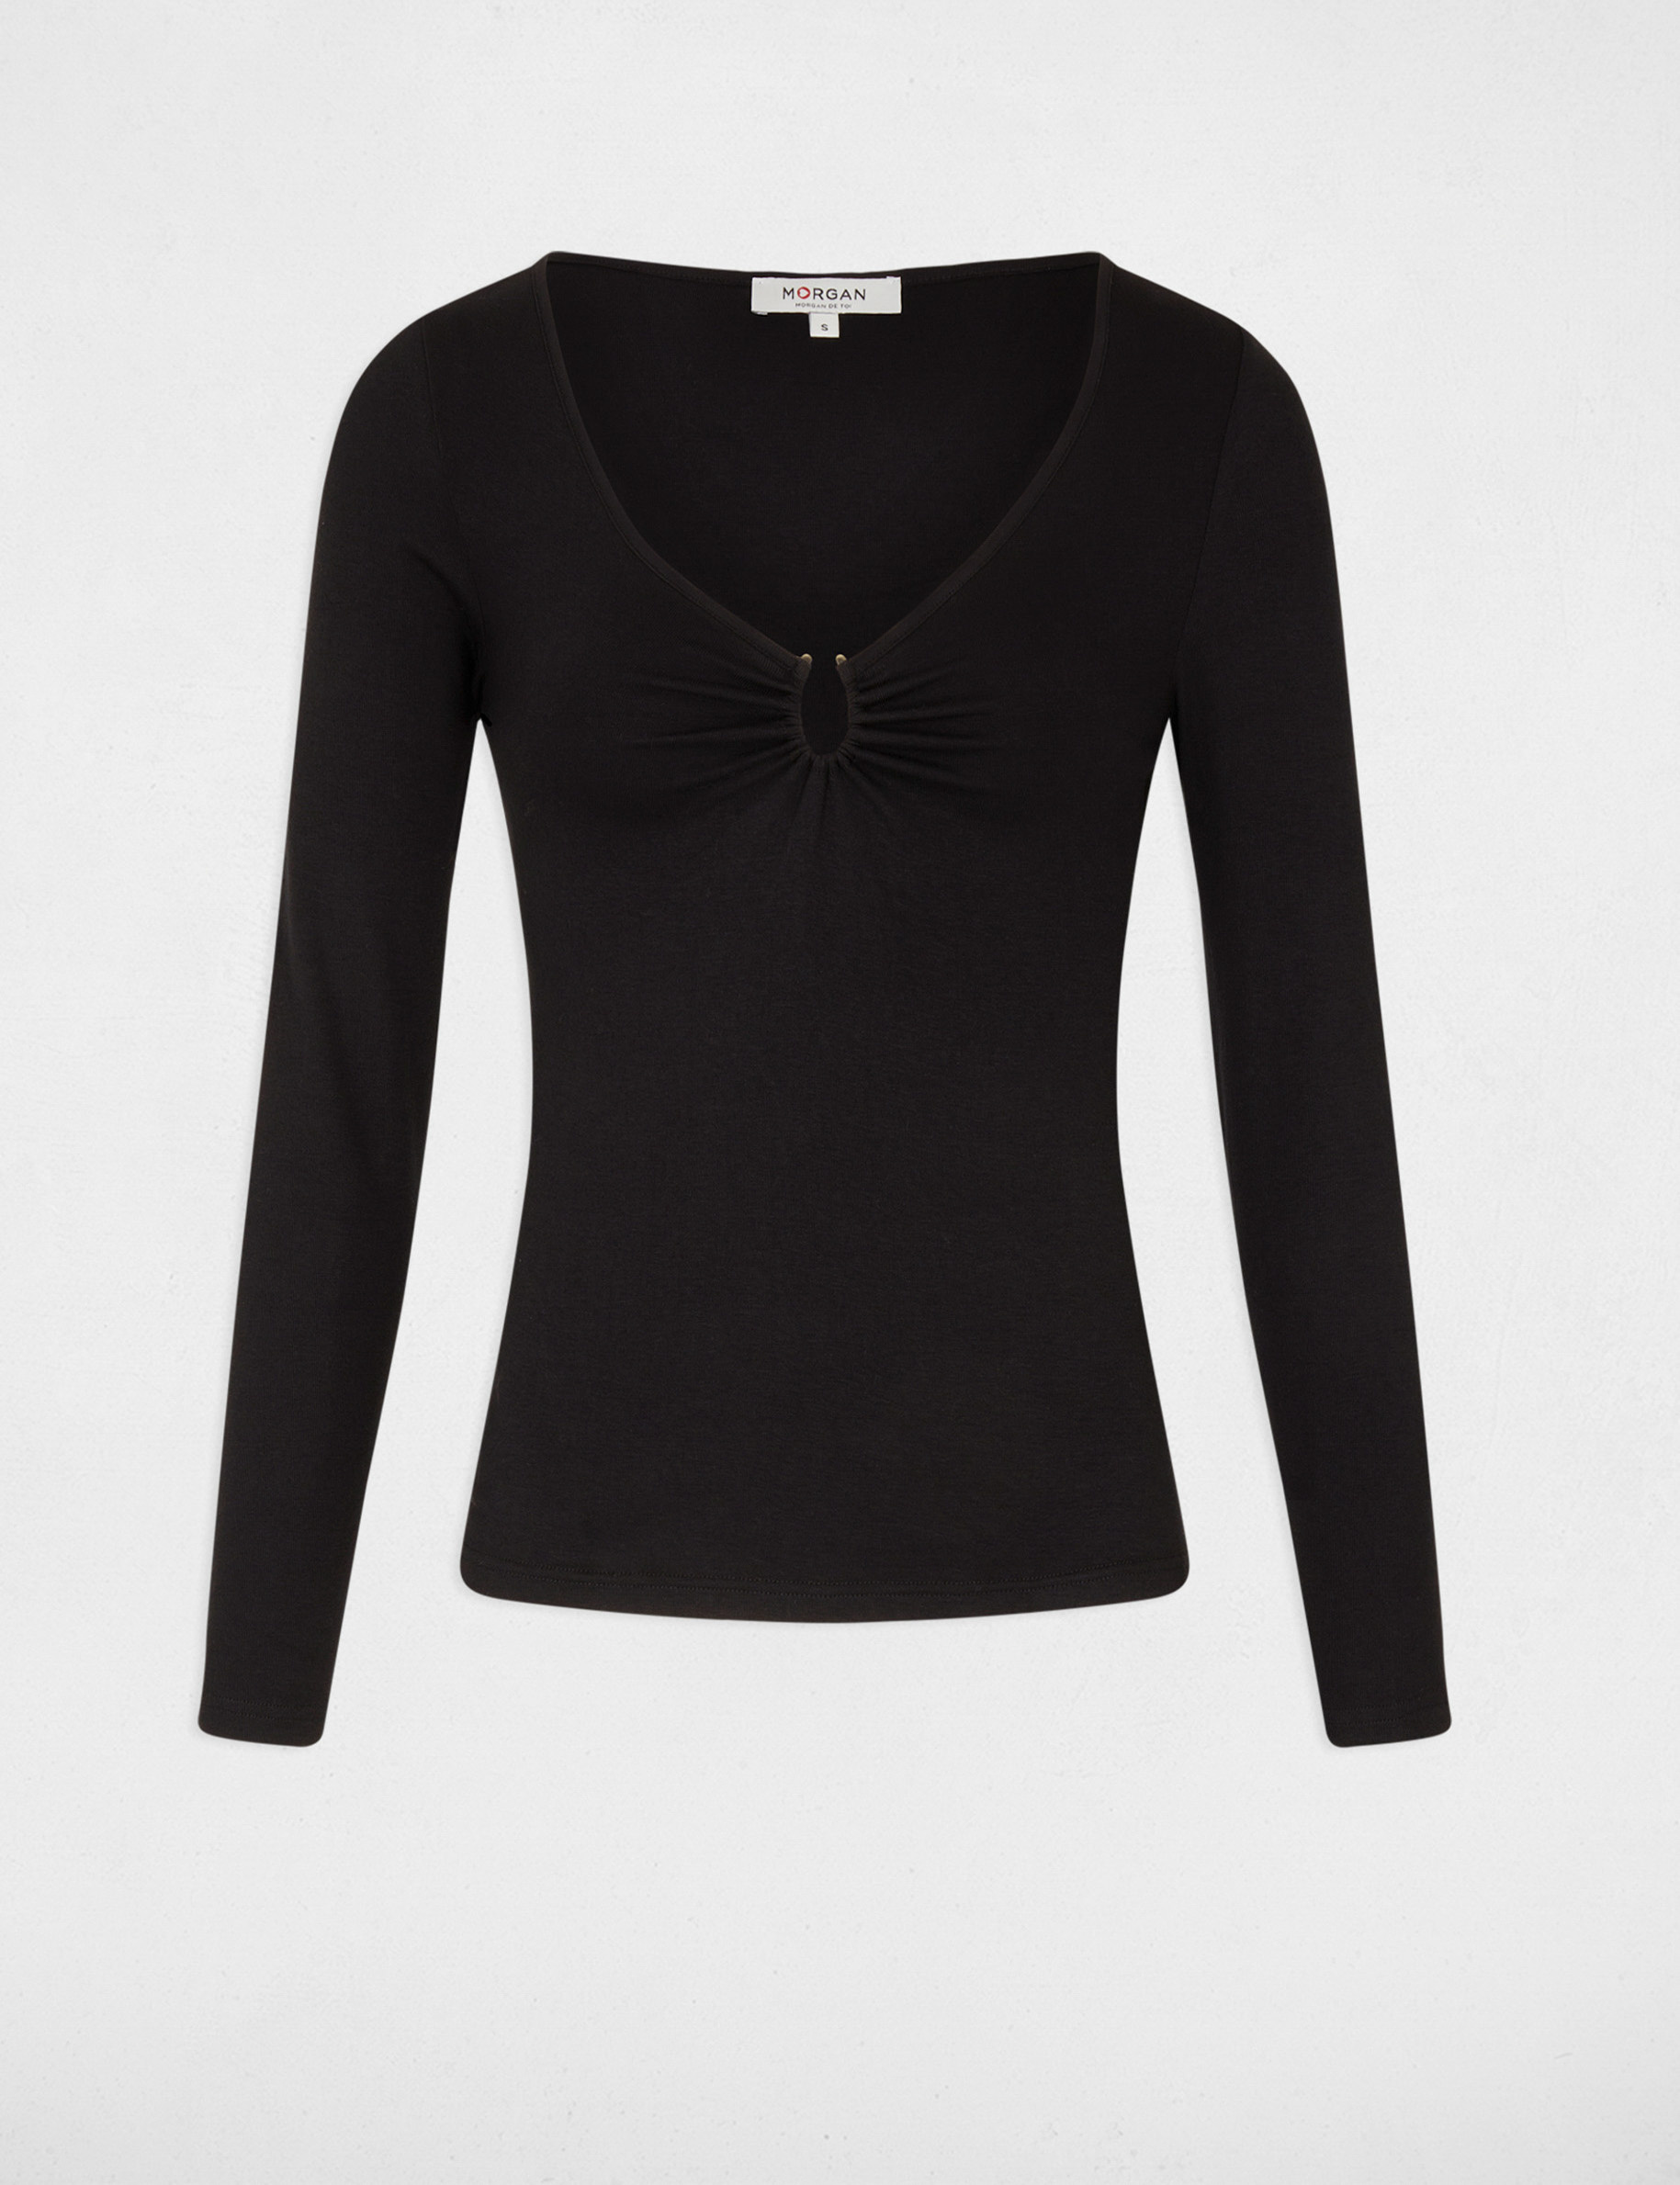 Long-sleeved t-shirt with V-neck black ladies'